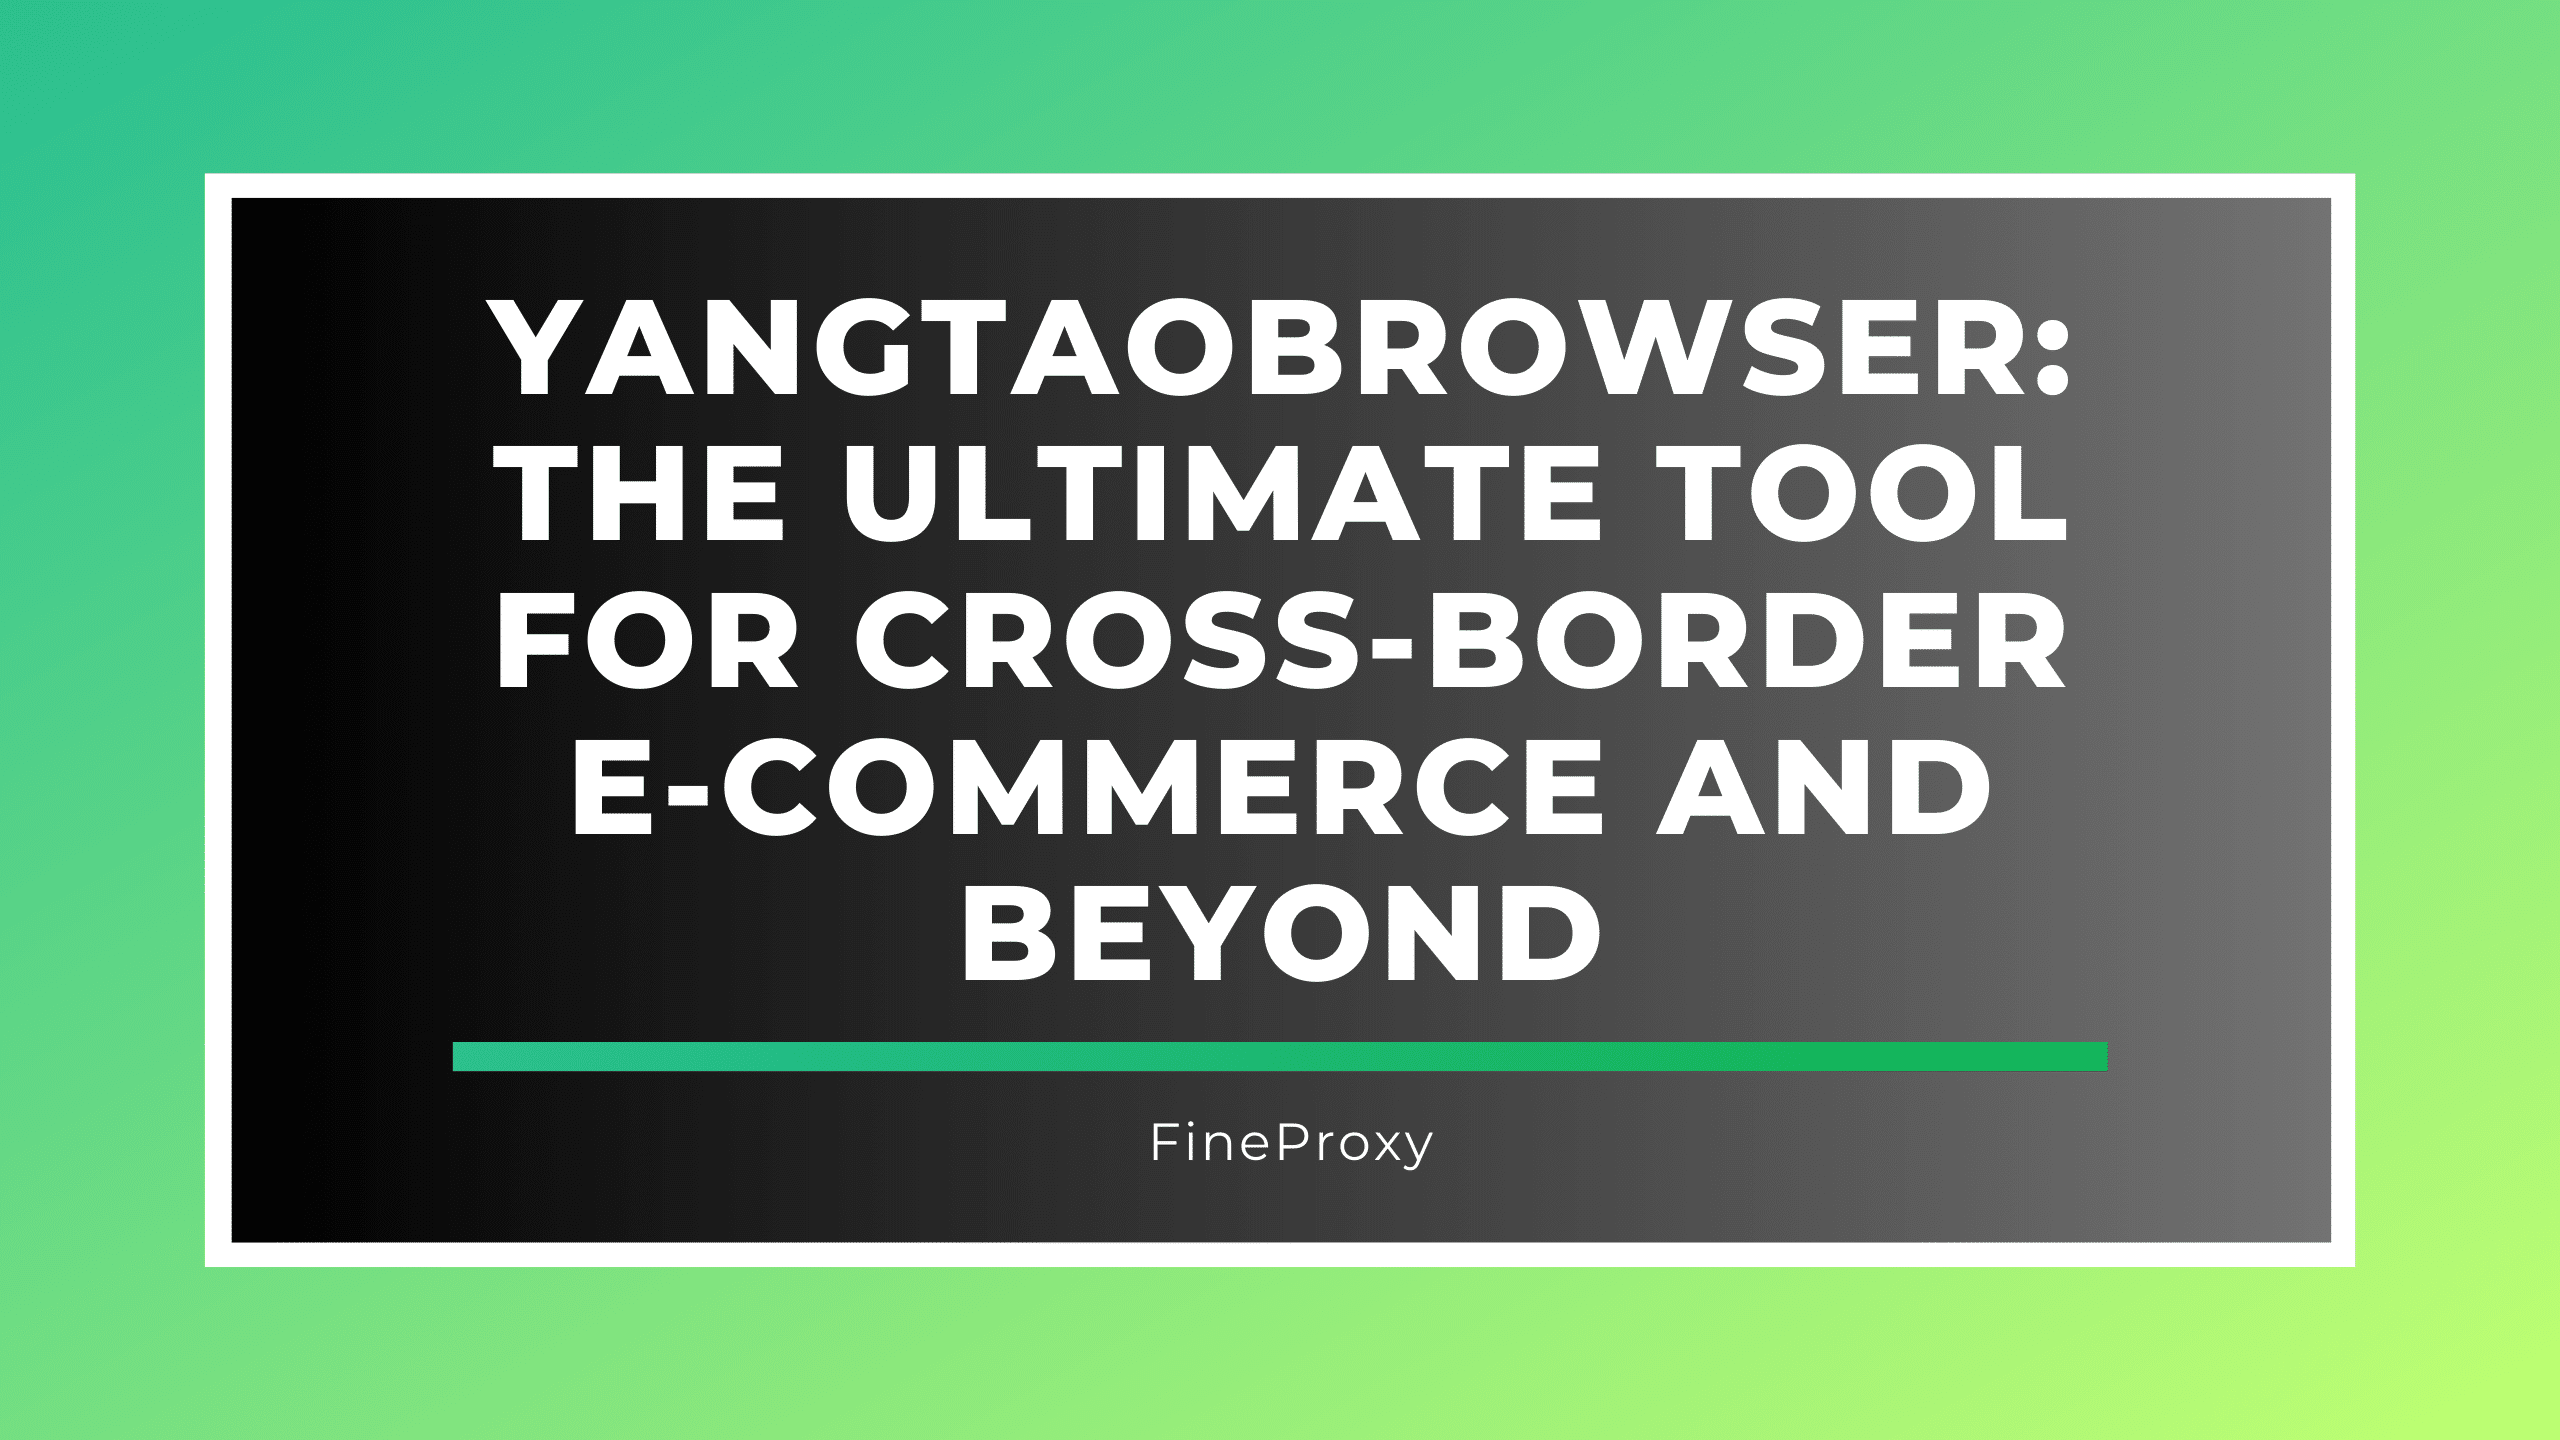 YangTaoBrowser: The Ultimate Tool for Cross-Border E-Commerce and Beyond